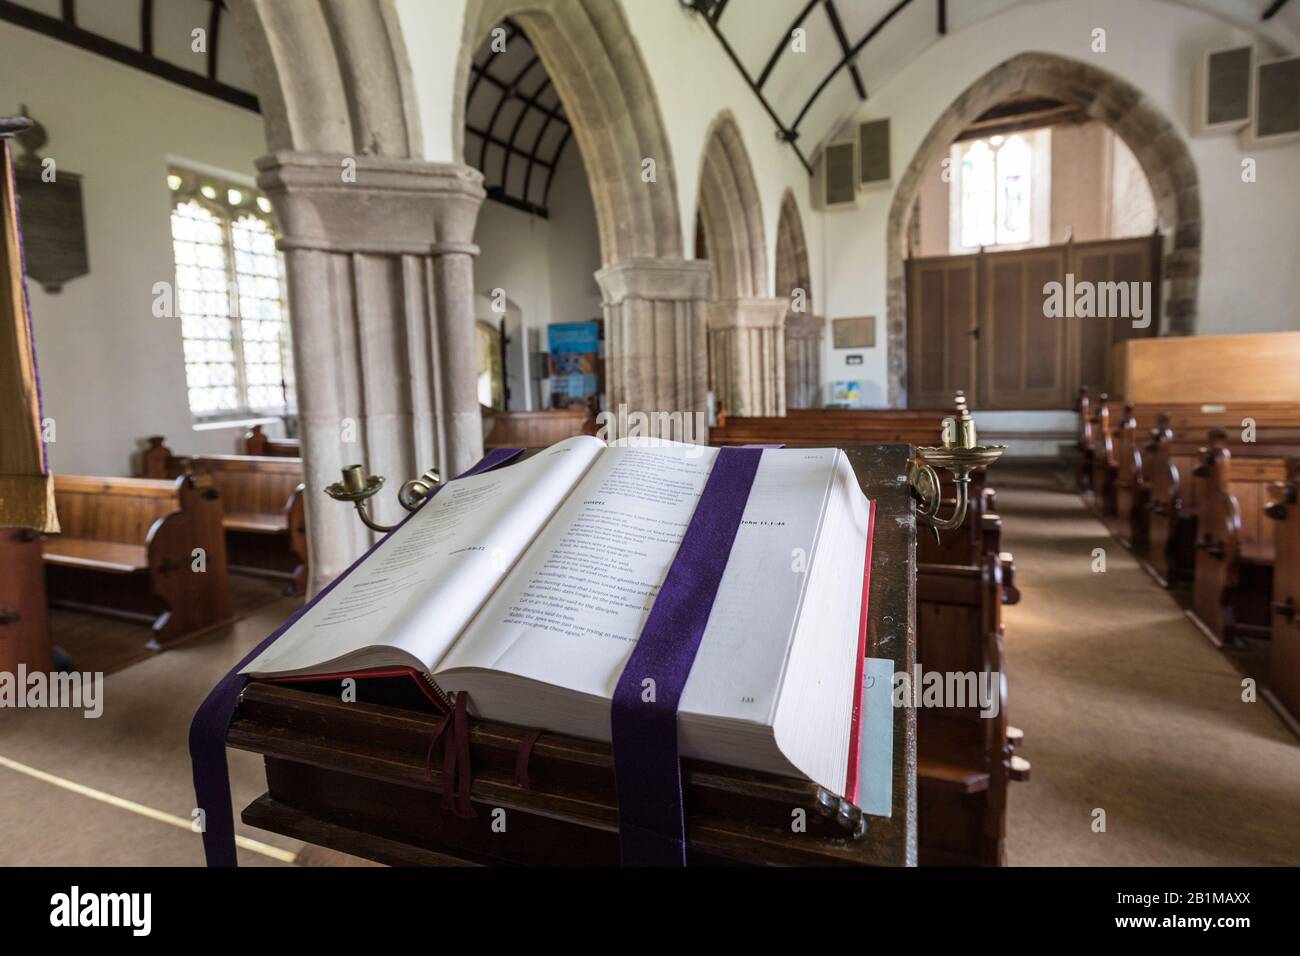 Open Bible on lecturn in undedicated Penallt Old Church, Monmouthshire, Wales, UK Stock Photo